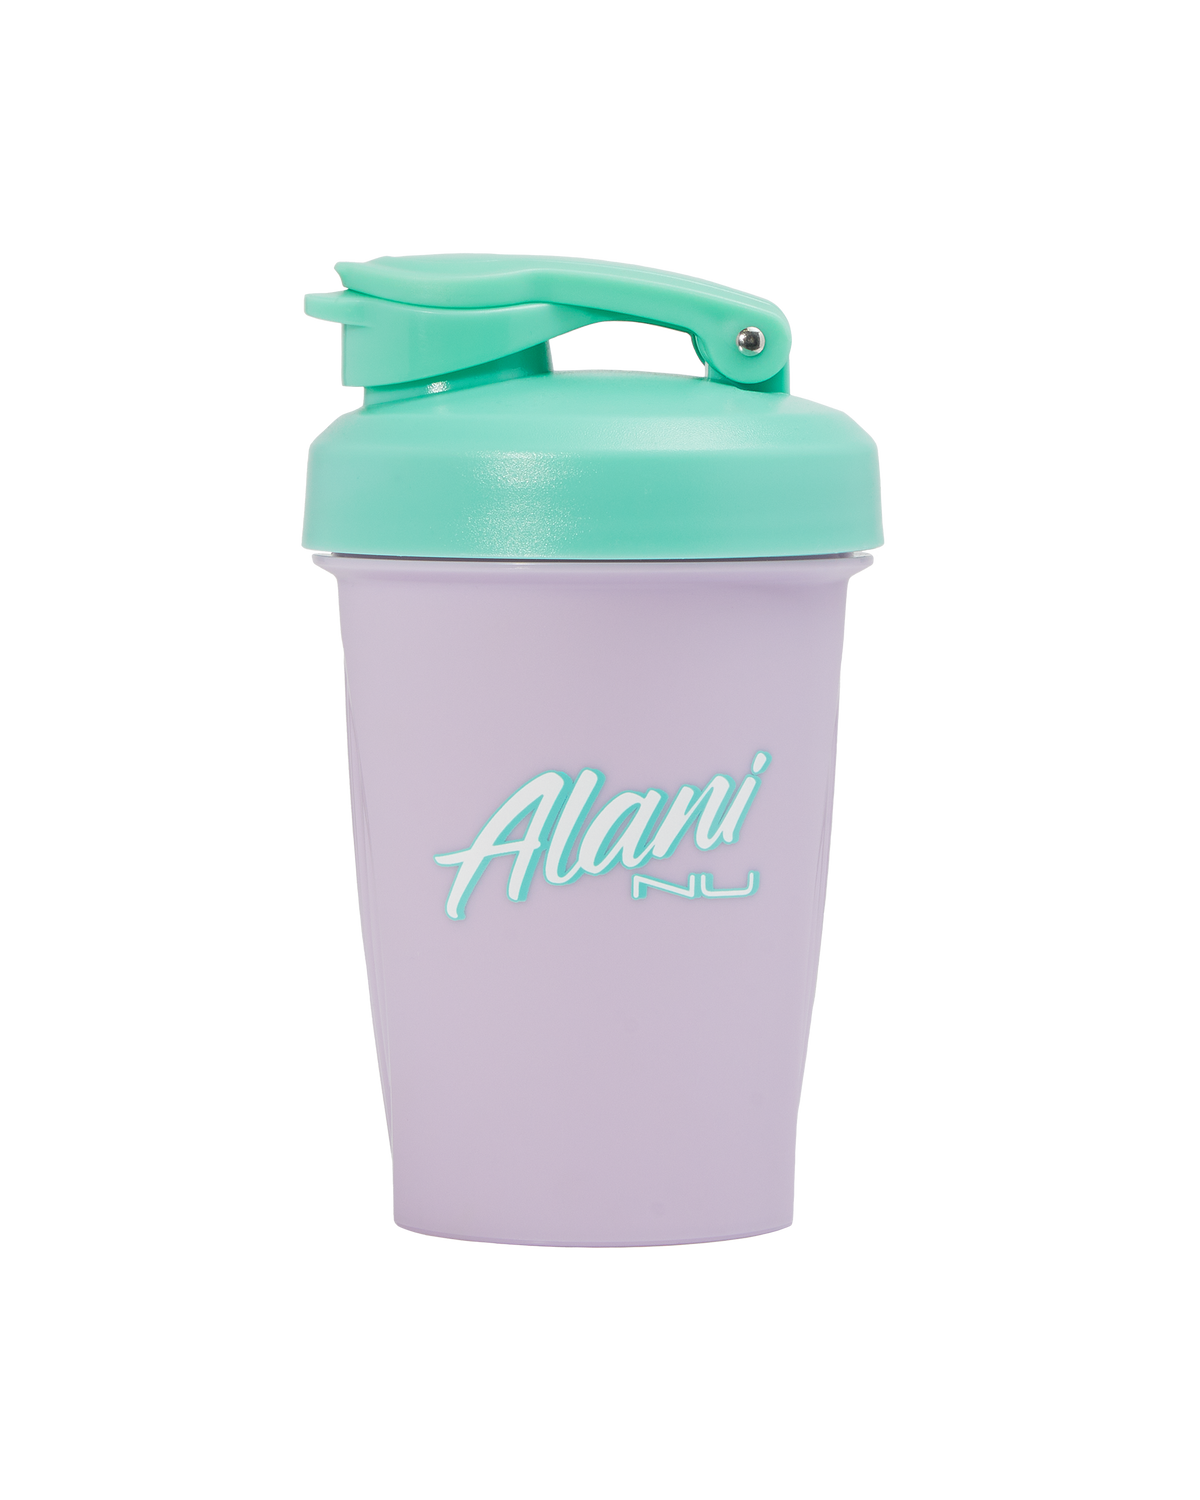 A 12oz Shaker in Lilac Love with Alani logo.